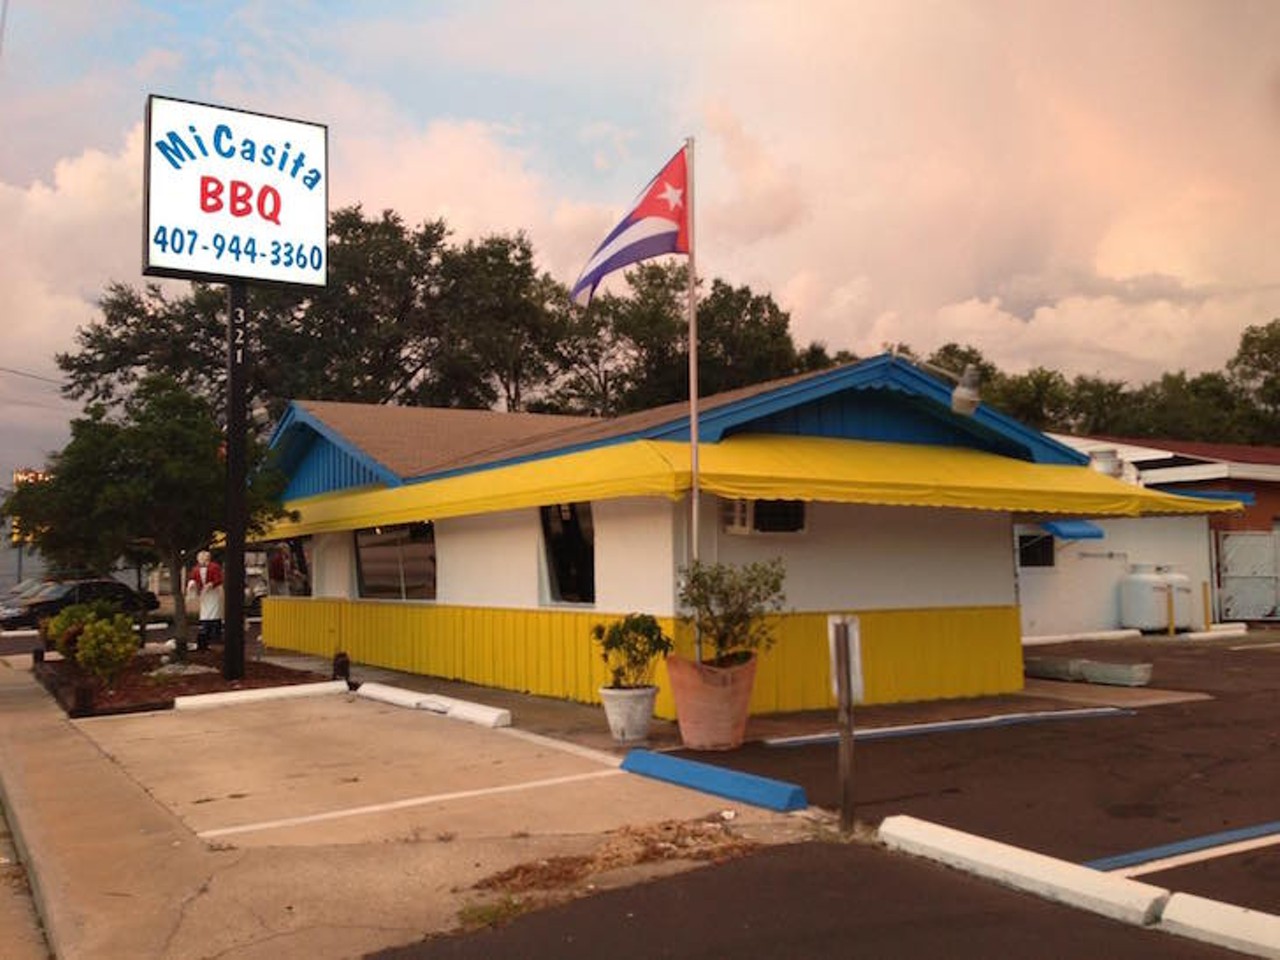 Mi Casita BBQ  
102 S. John Young Parkway, Kissimmee, 407-944-3360
Don&#146;t be fooled by the appearance, Cuban restaurant Mi Casita BBQ is worth a second glance. Their cuban sandwiches are something to write home about, but no matter what you get, you&#146;re sure to bite into heaven. 
Photo via Facebook/Mi Casita BBQ